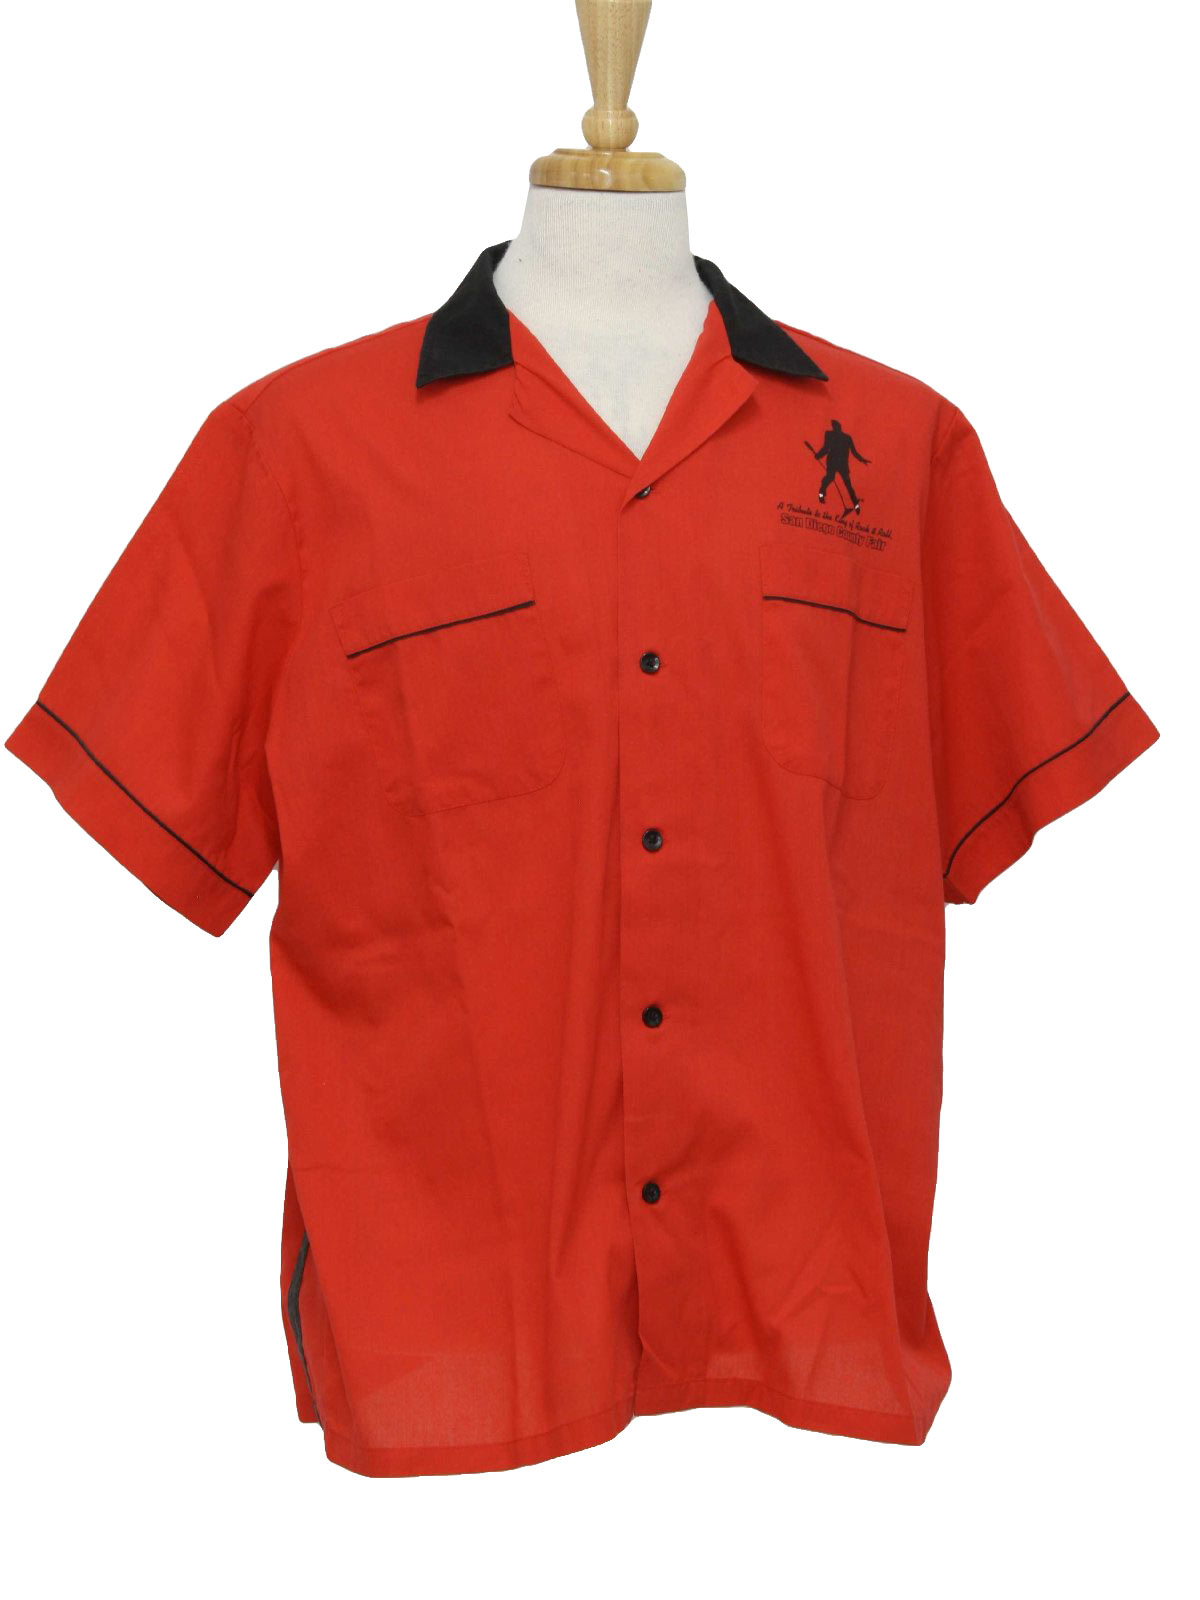 90's Vintage Bowling Shirt: 90s -Cruisin USA- Mens red and black ...